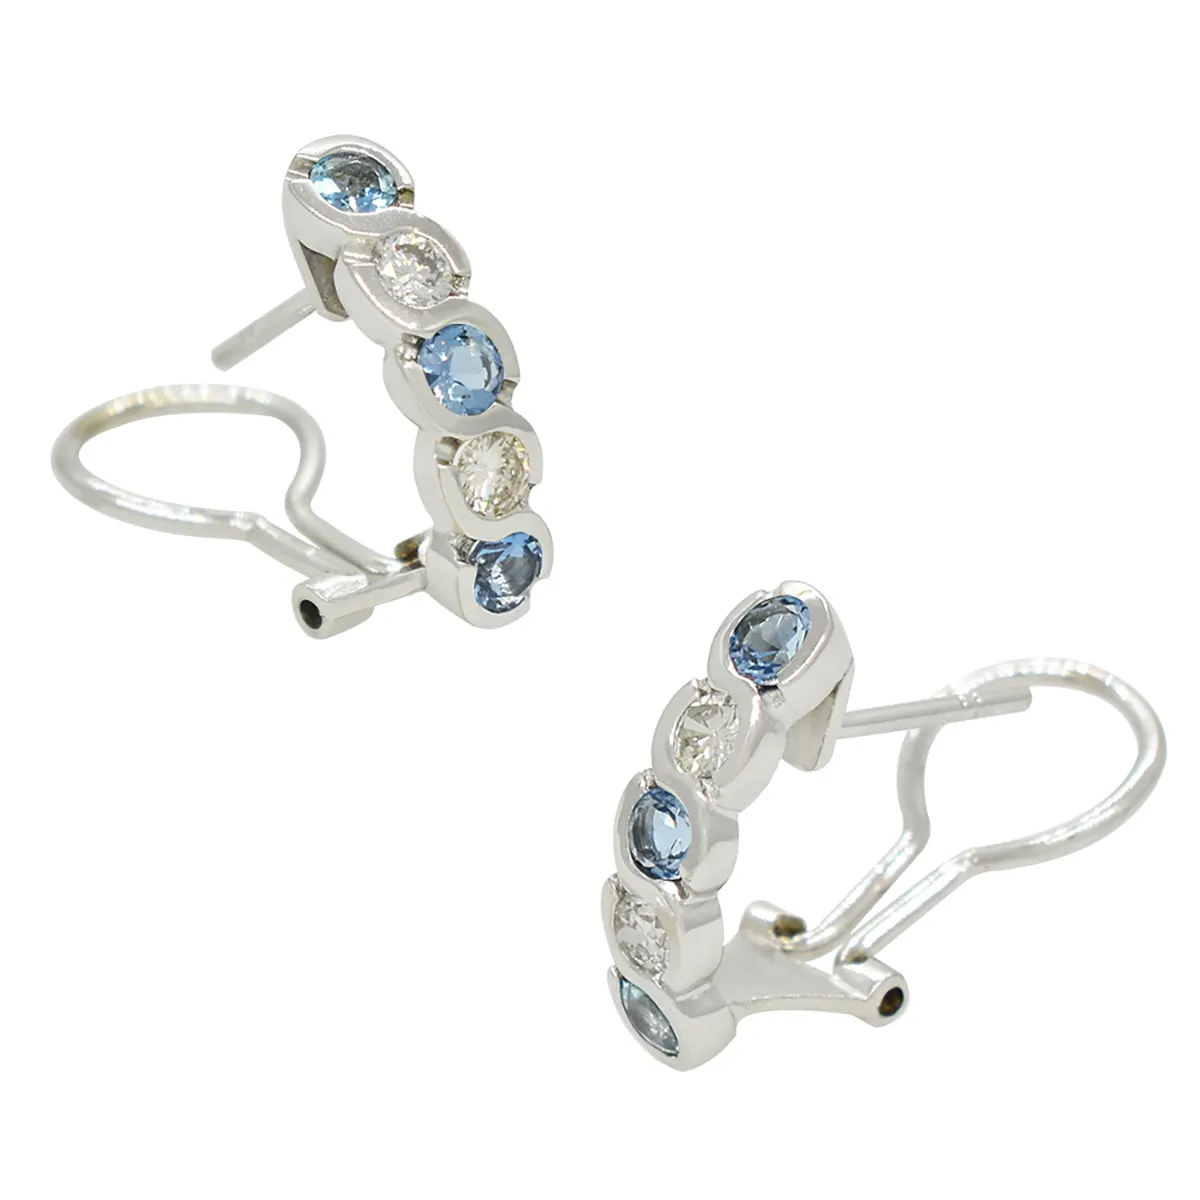 Drop Earrings in 18K White Gold with Diamonds and Aquamarines in Bezel Setting